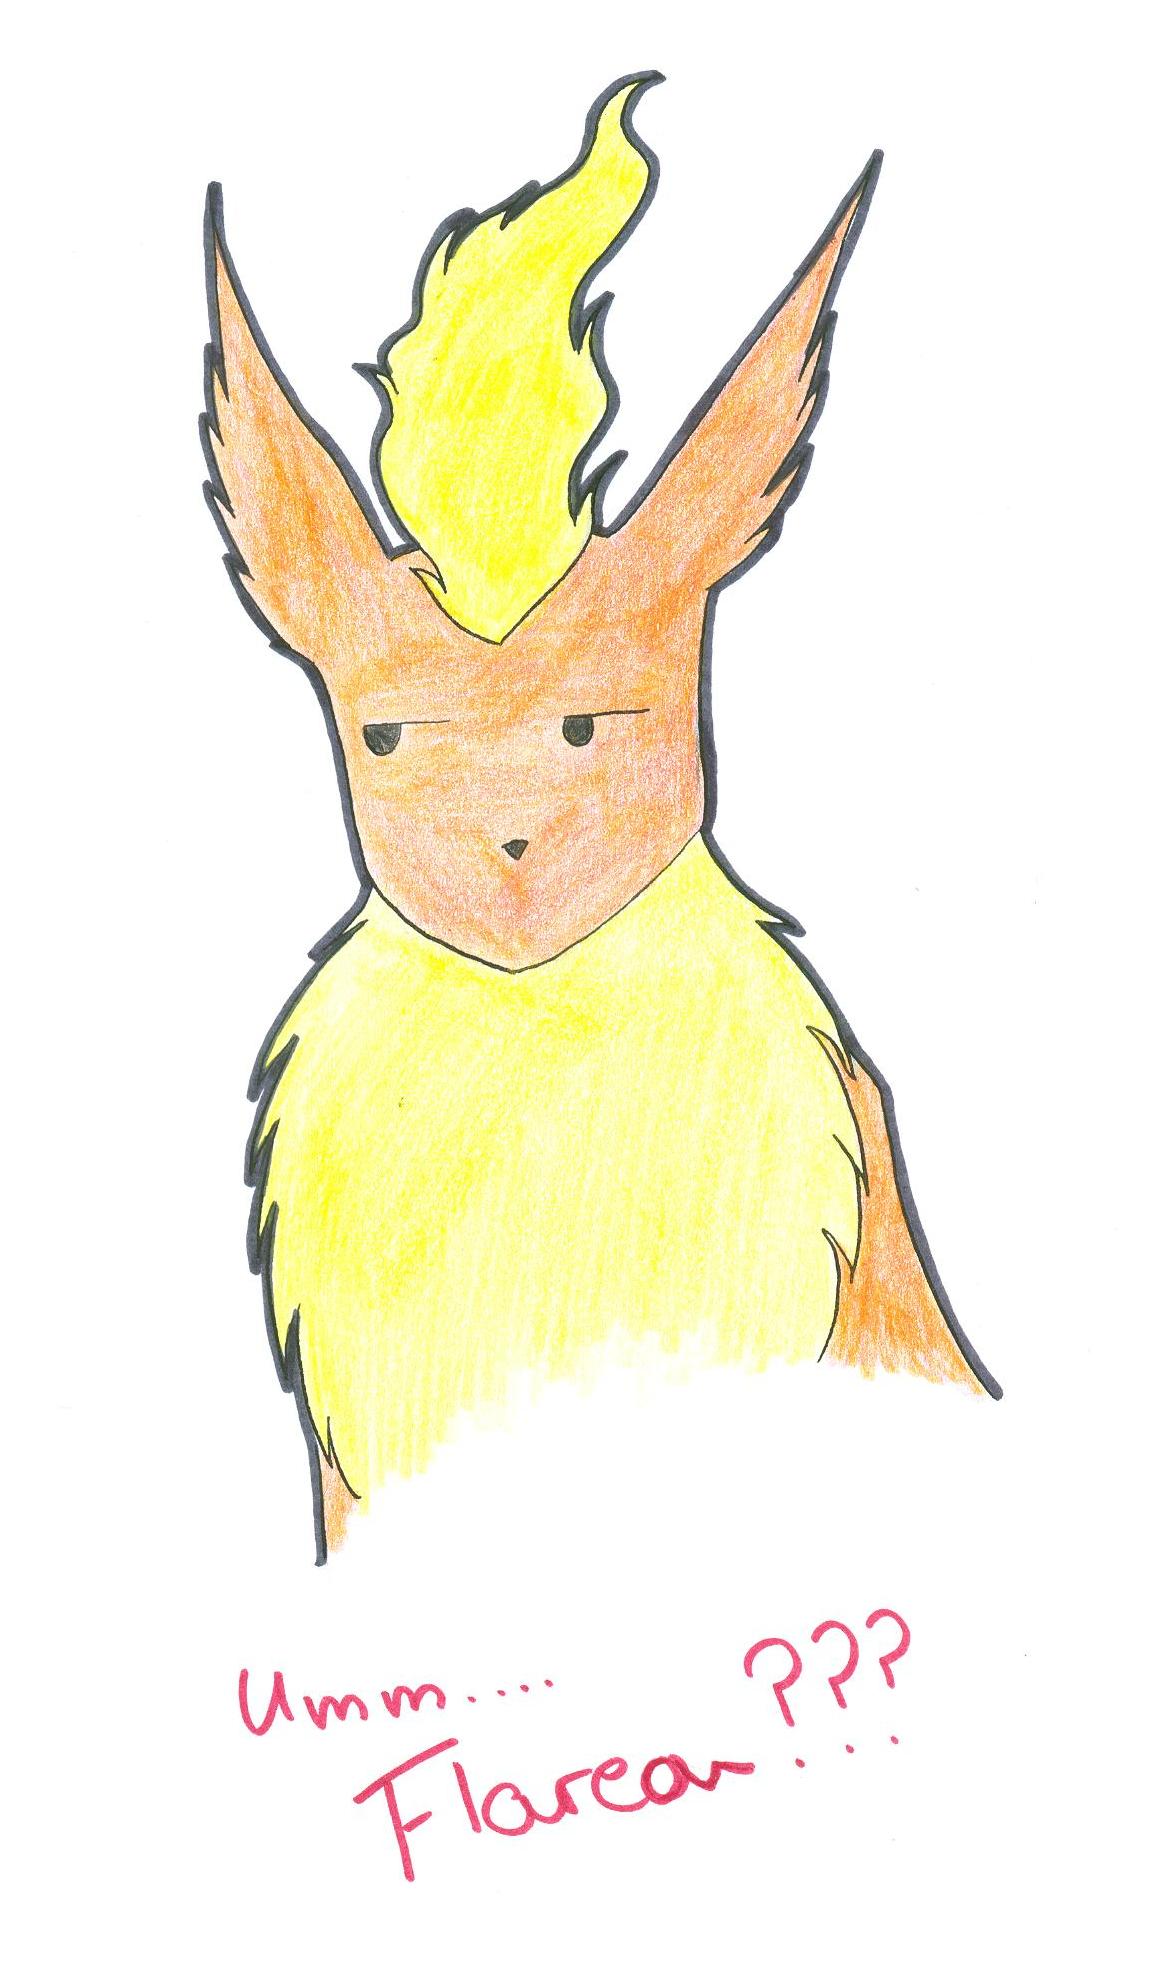 Funny Faces 2: Flareon by Isukaru